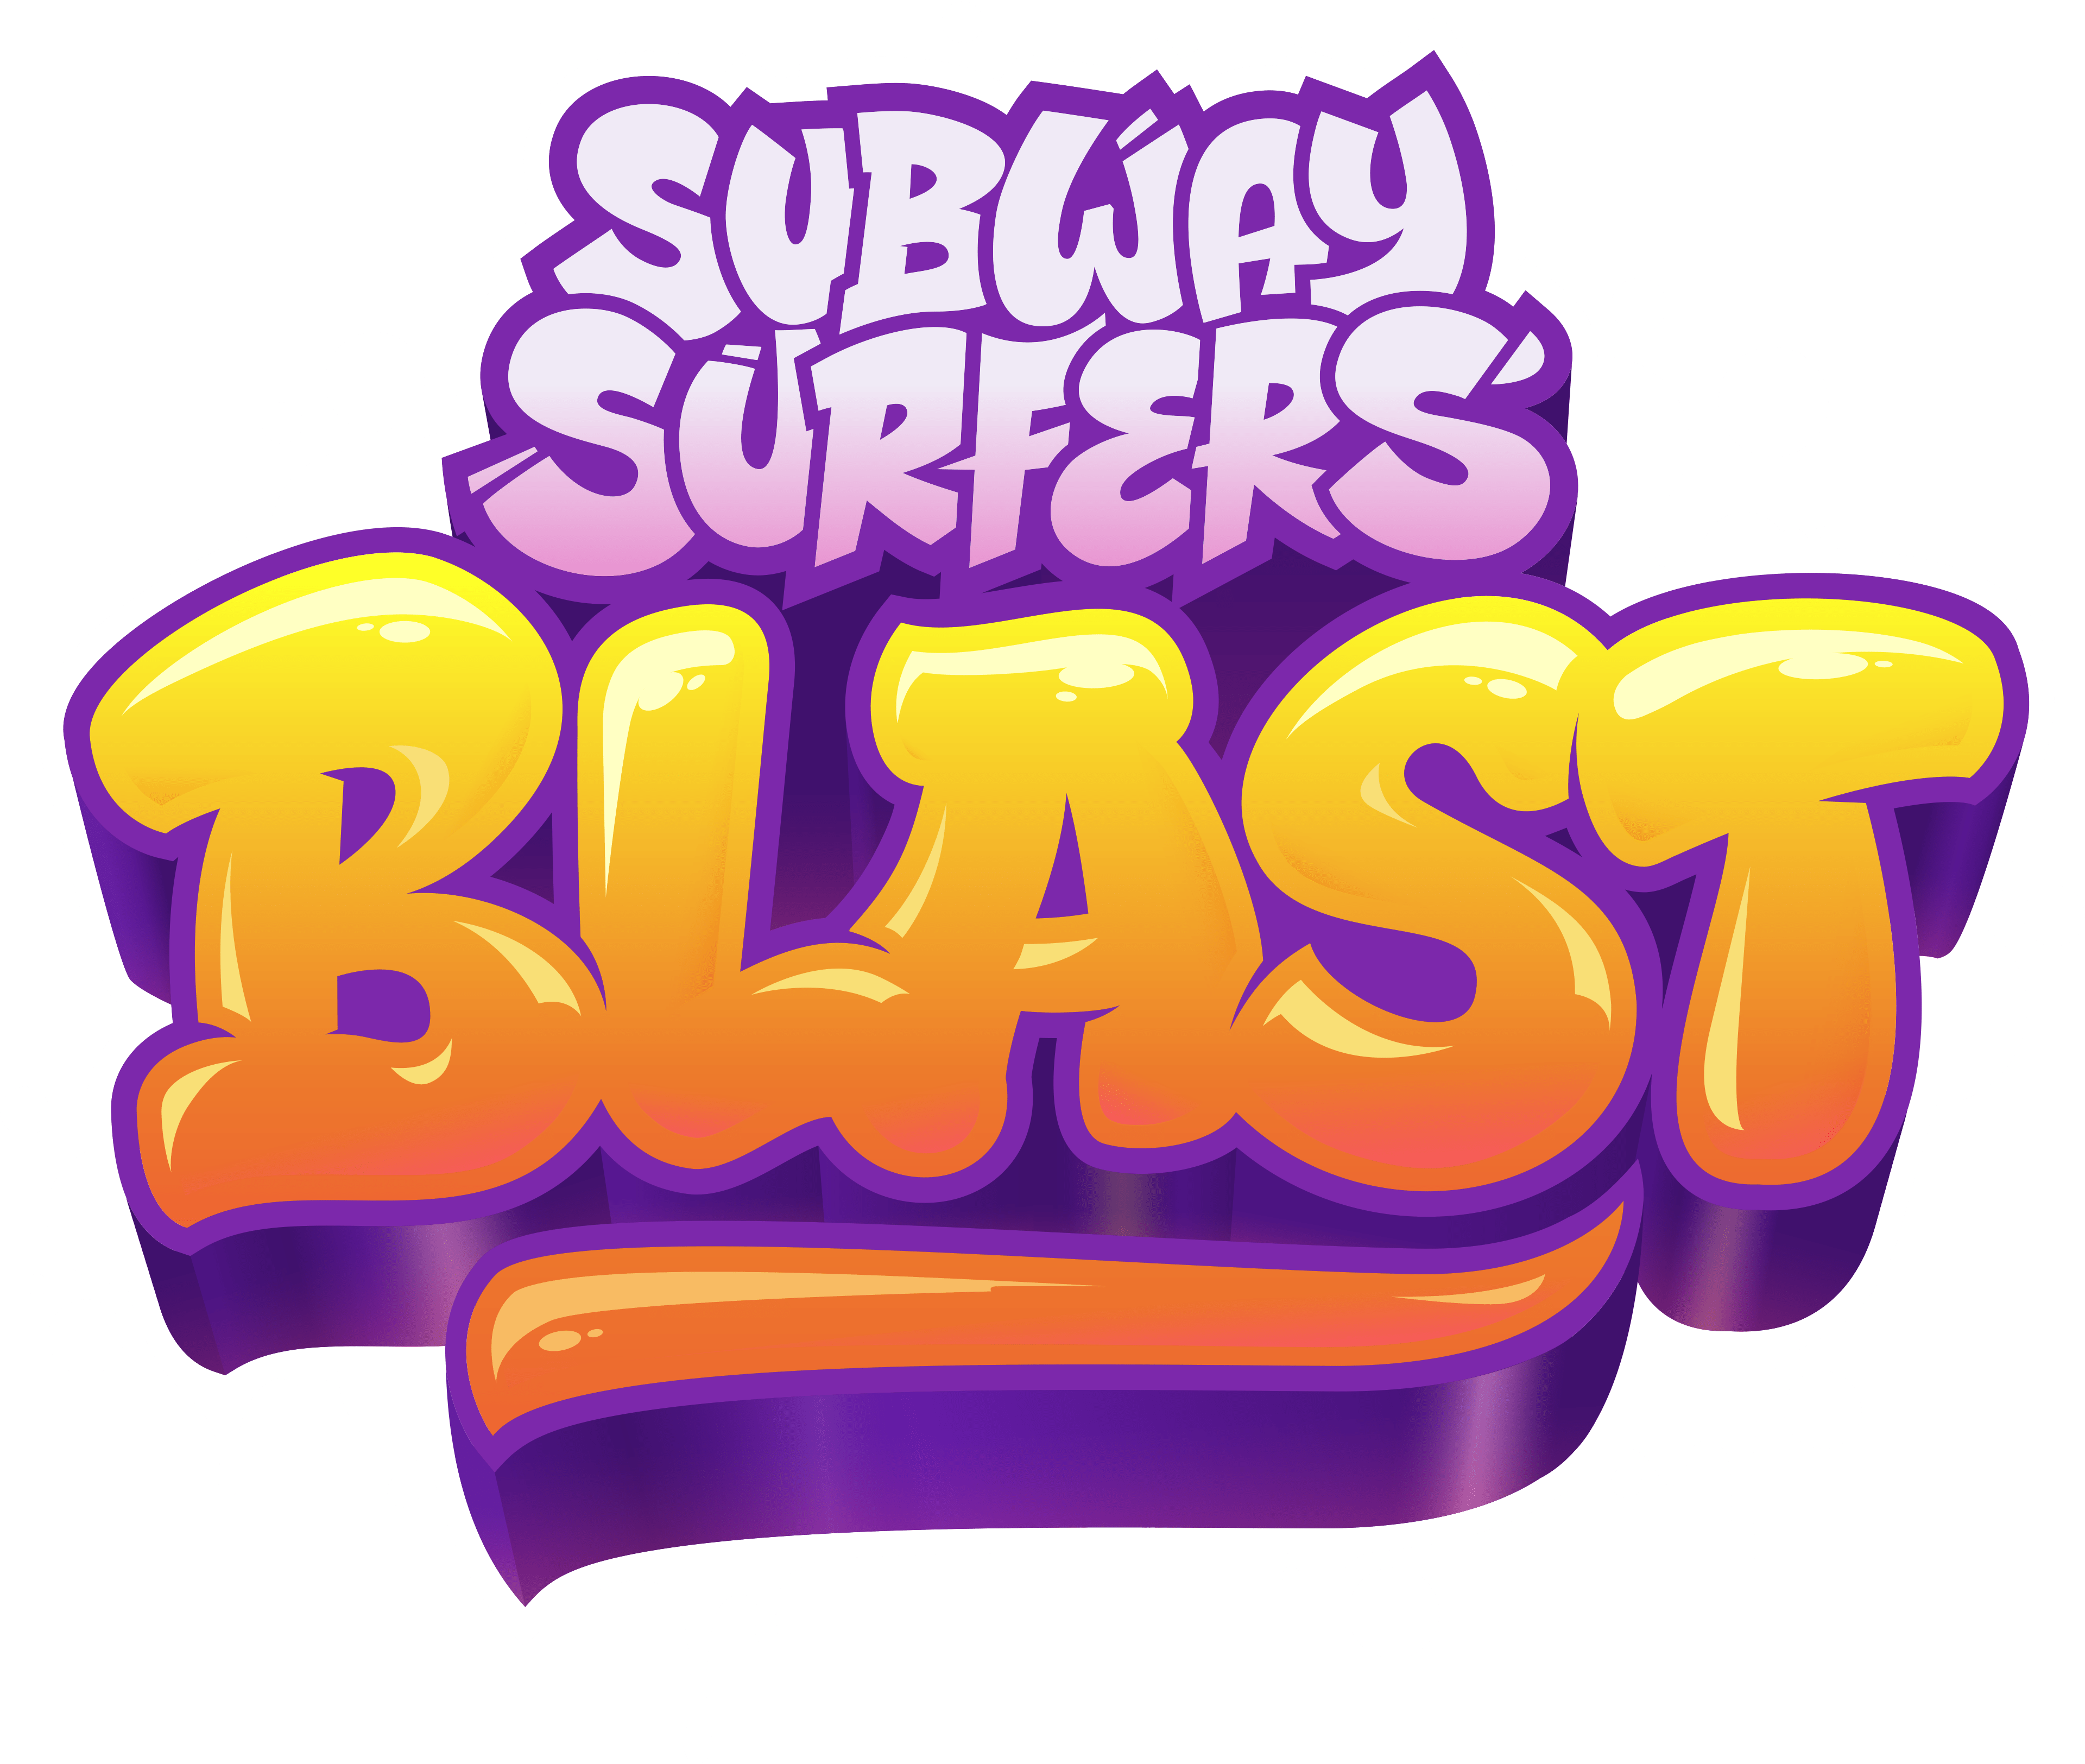 SYBO - Subway Surfers Grows Franchise With New Game, Subway